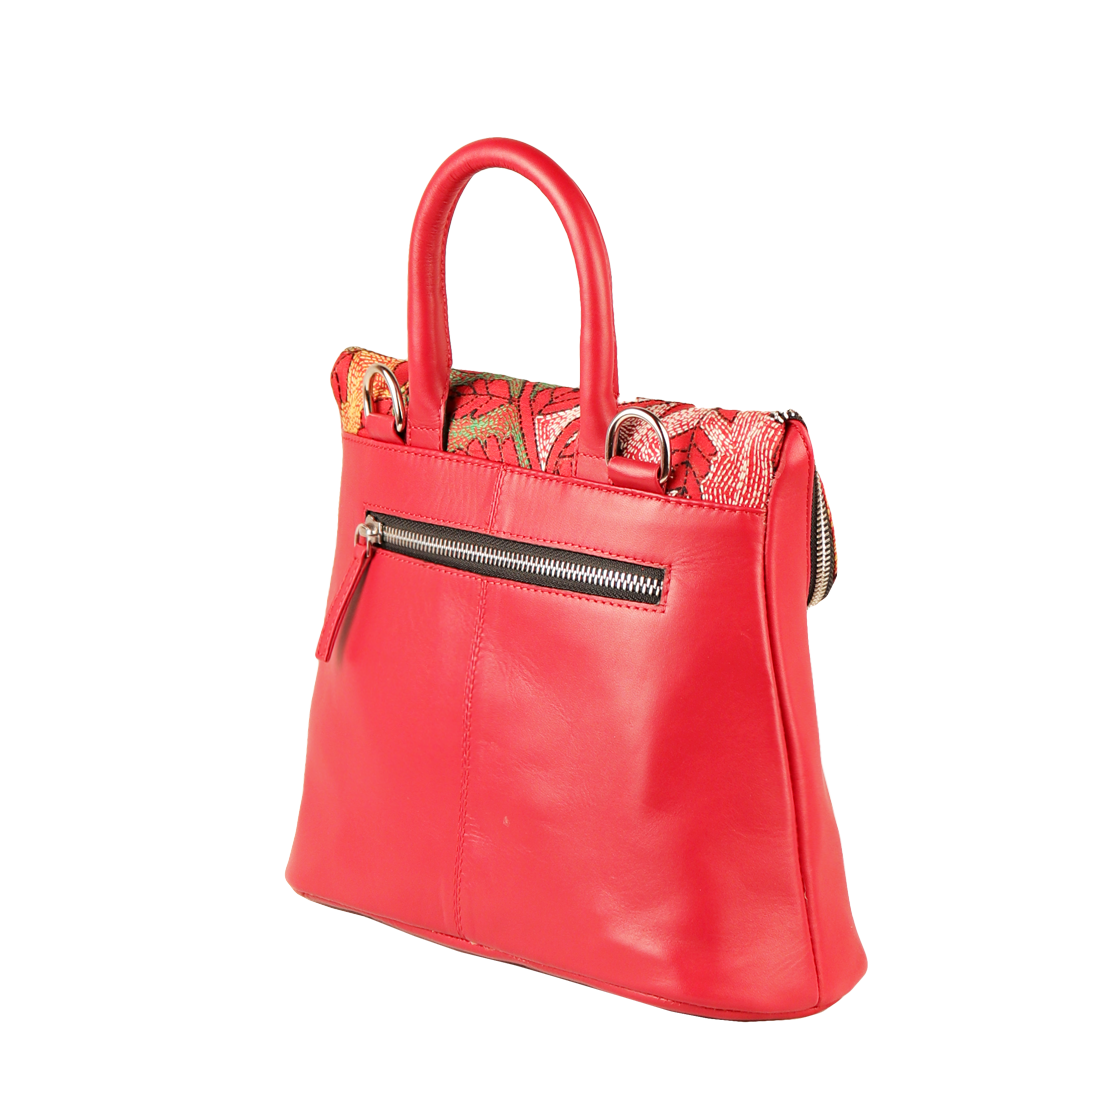 Combo of Leather Embroidery Scarlet Red Handbag & Mini Tote